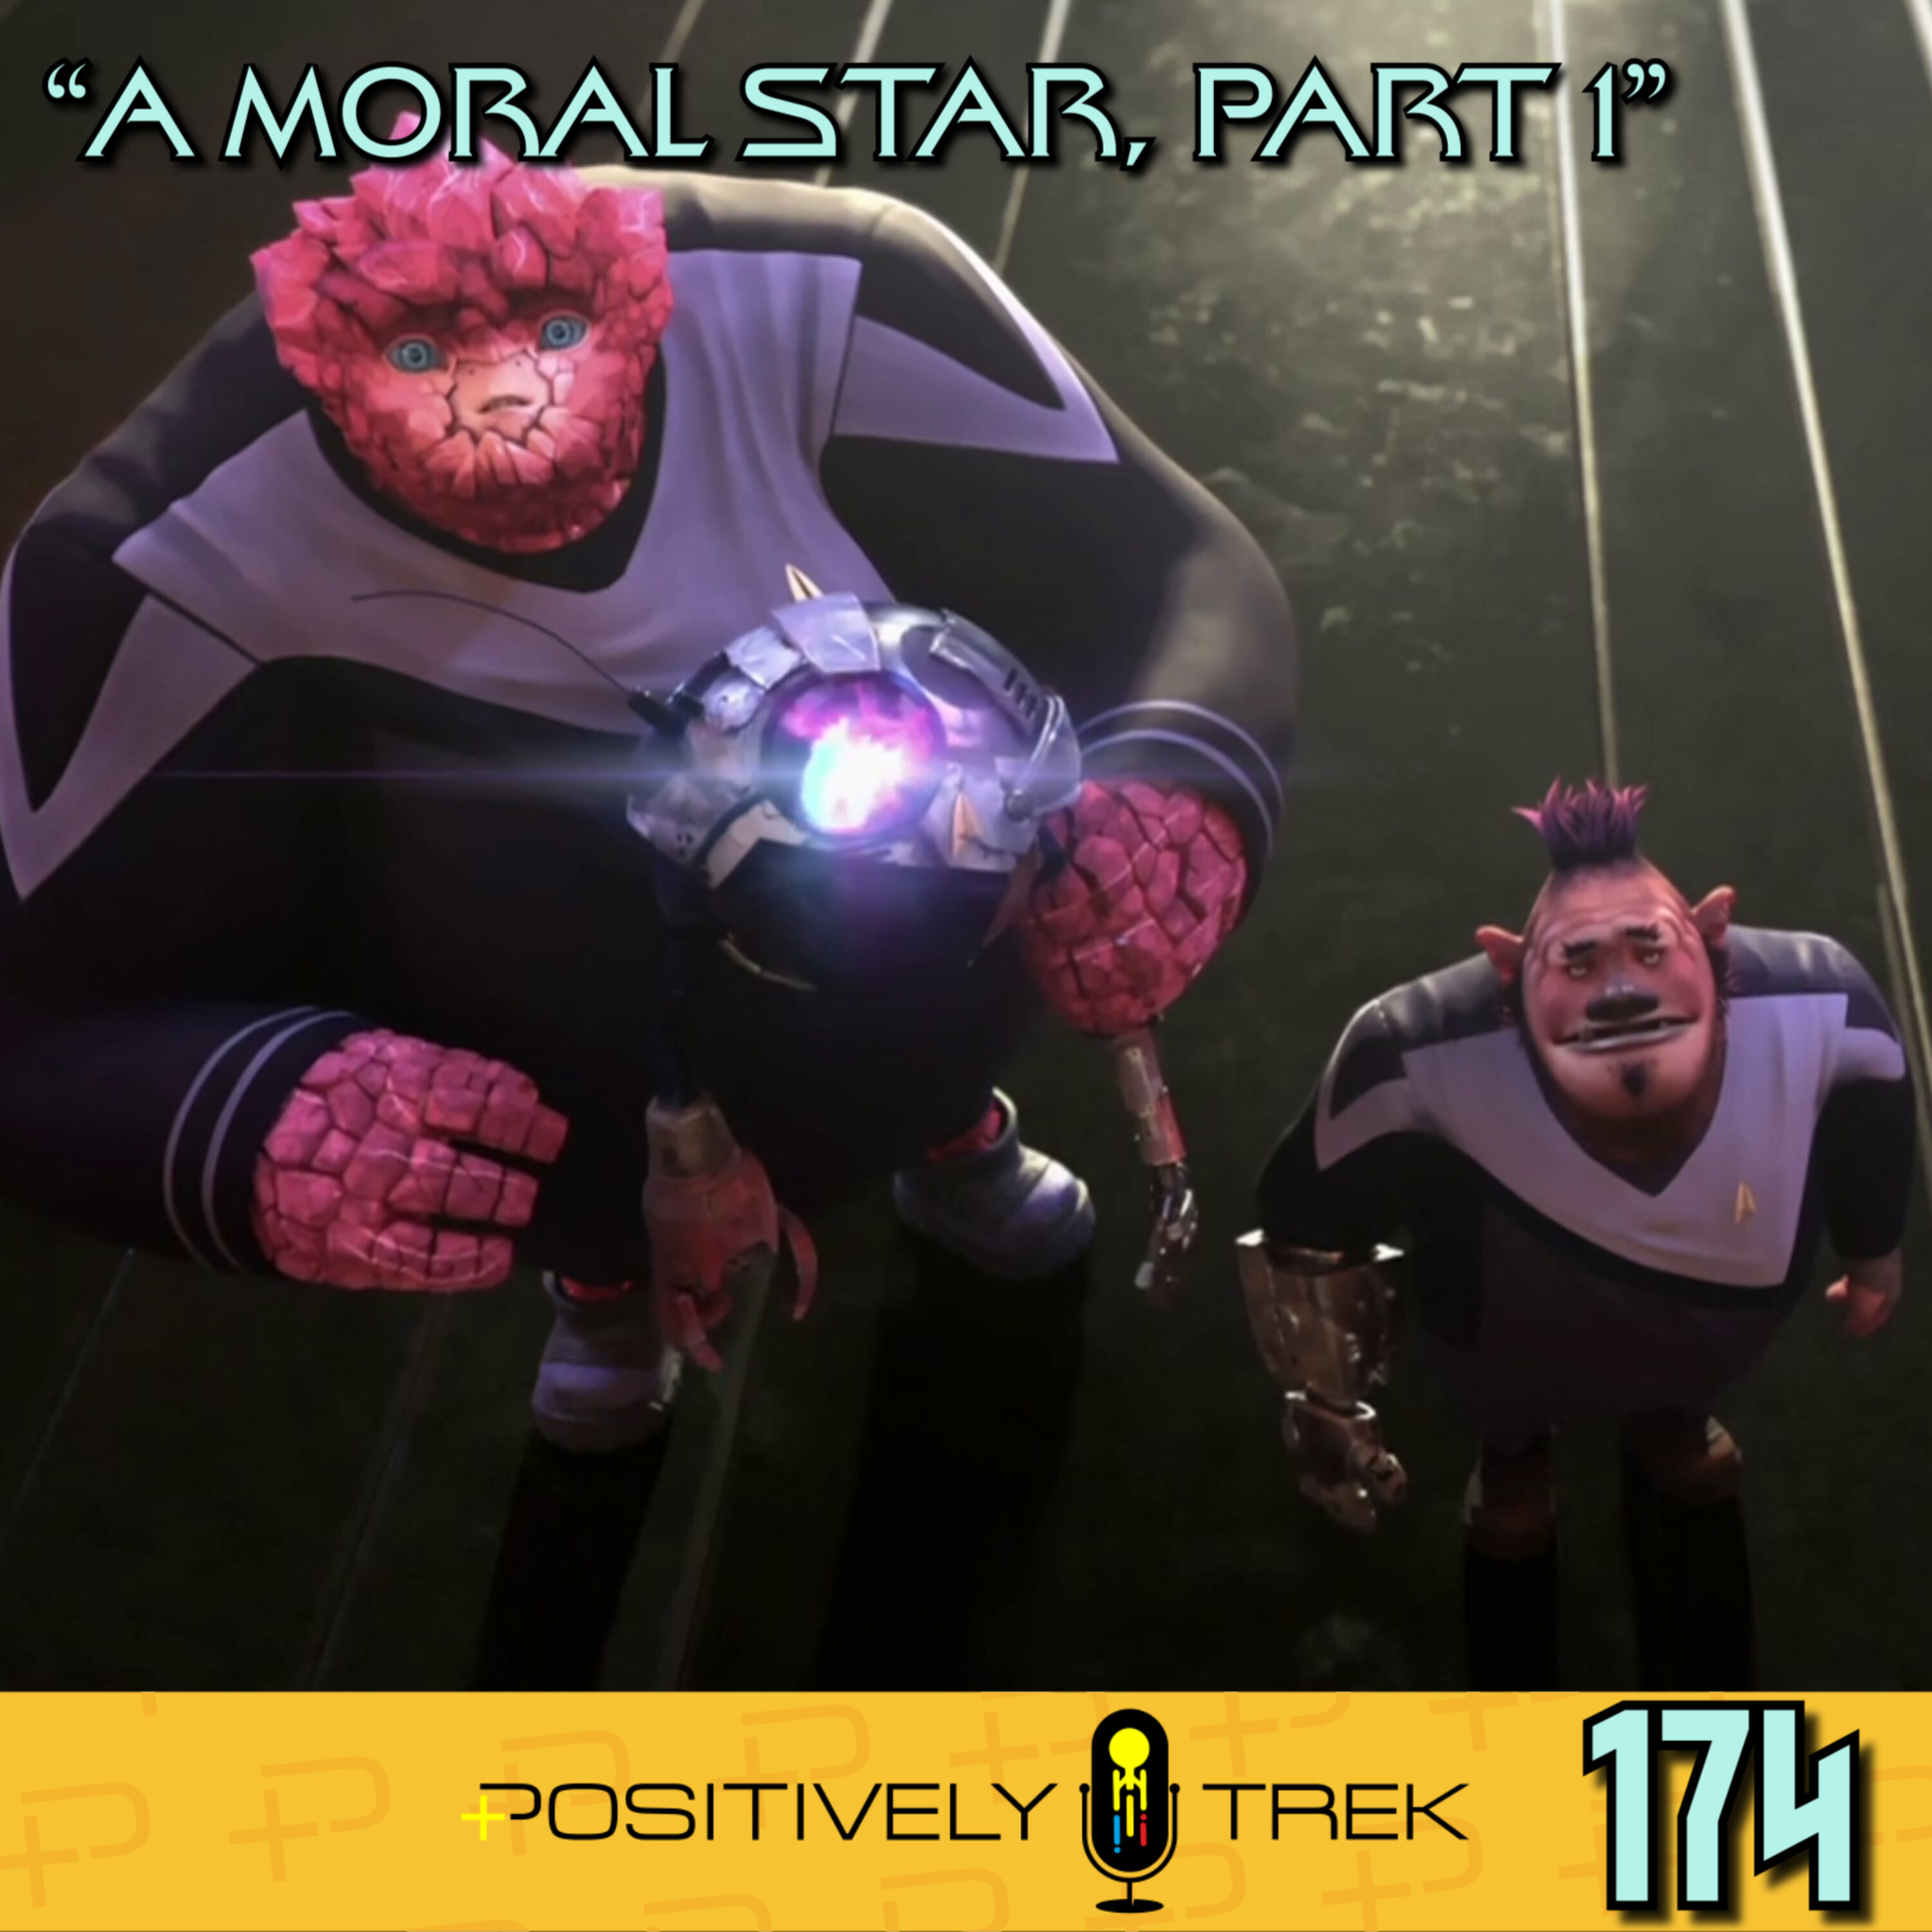 Prodigy Review: “A Moral Star, Part 1” (1.09) Image